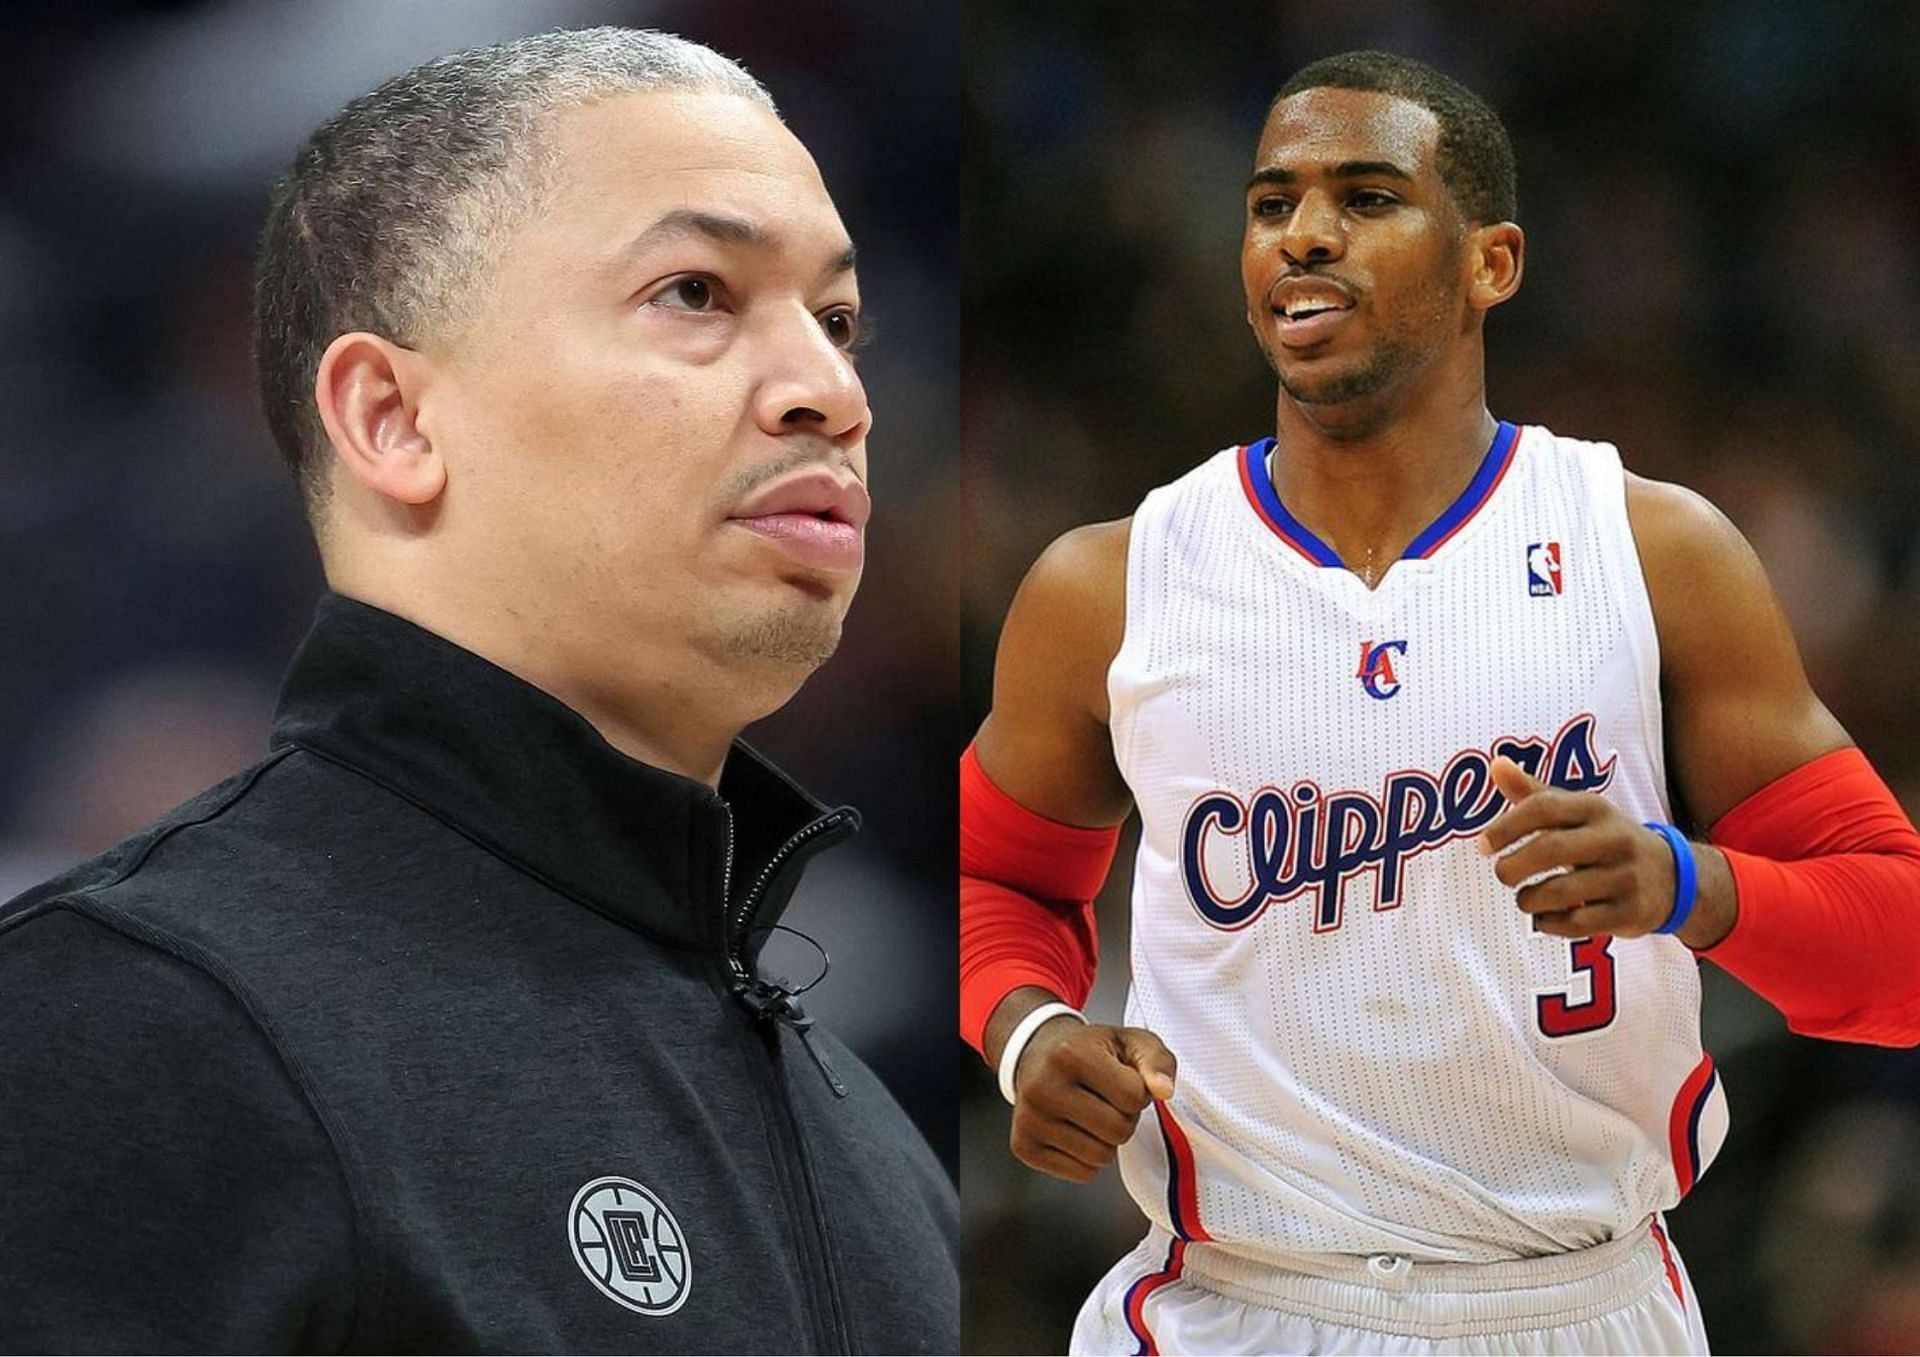 According to Chris Paul, some of his LA Clippers teammates during the 2013-14 season didn